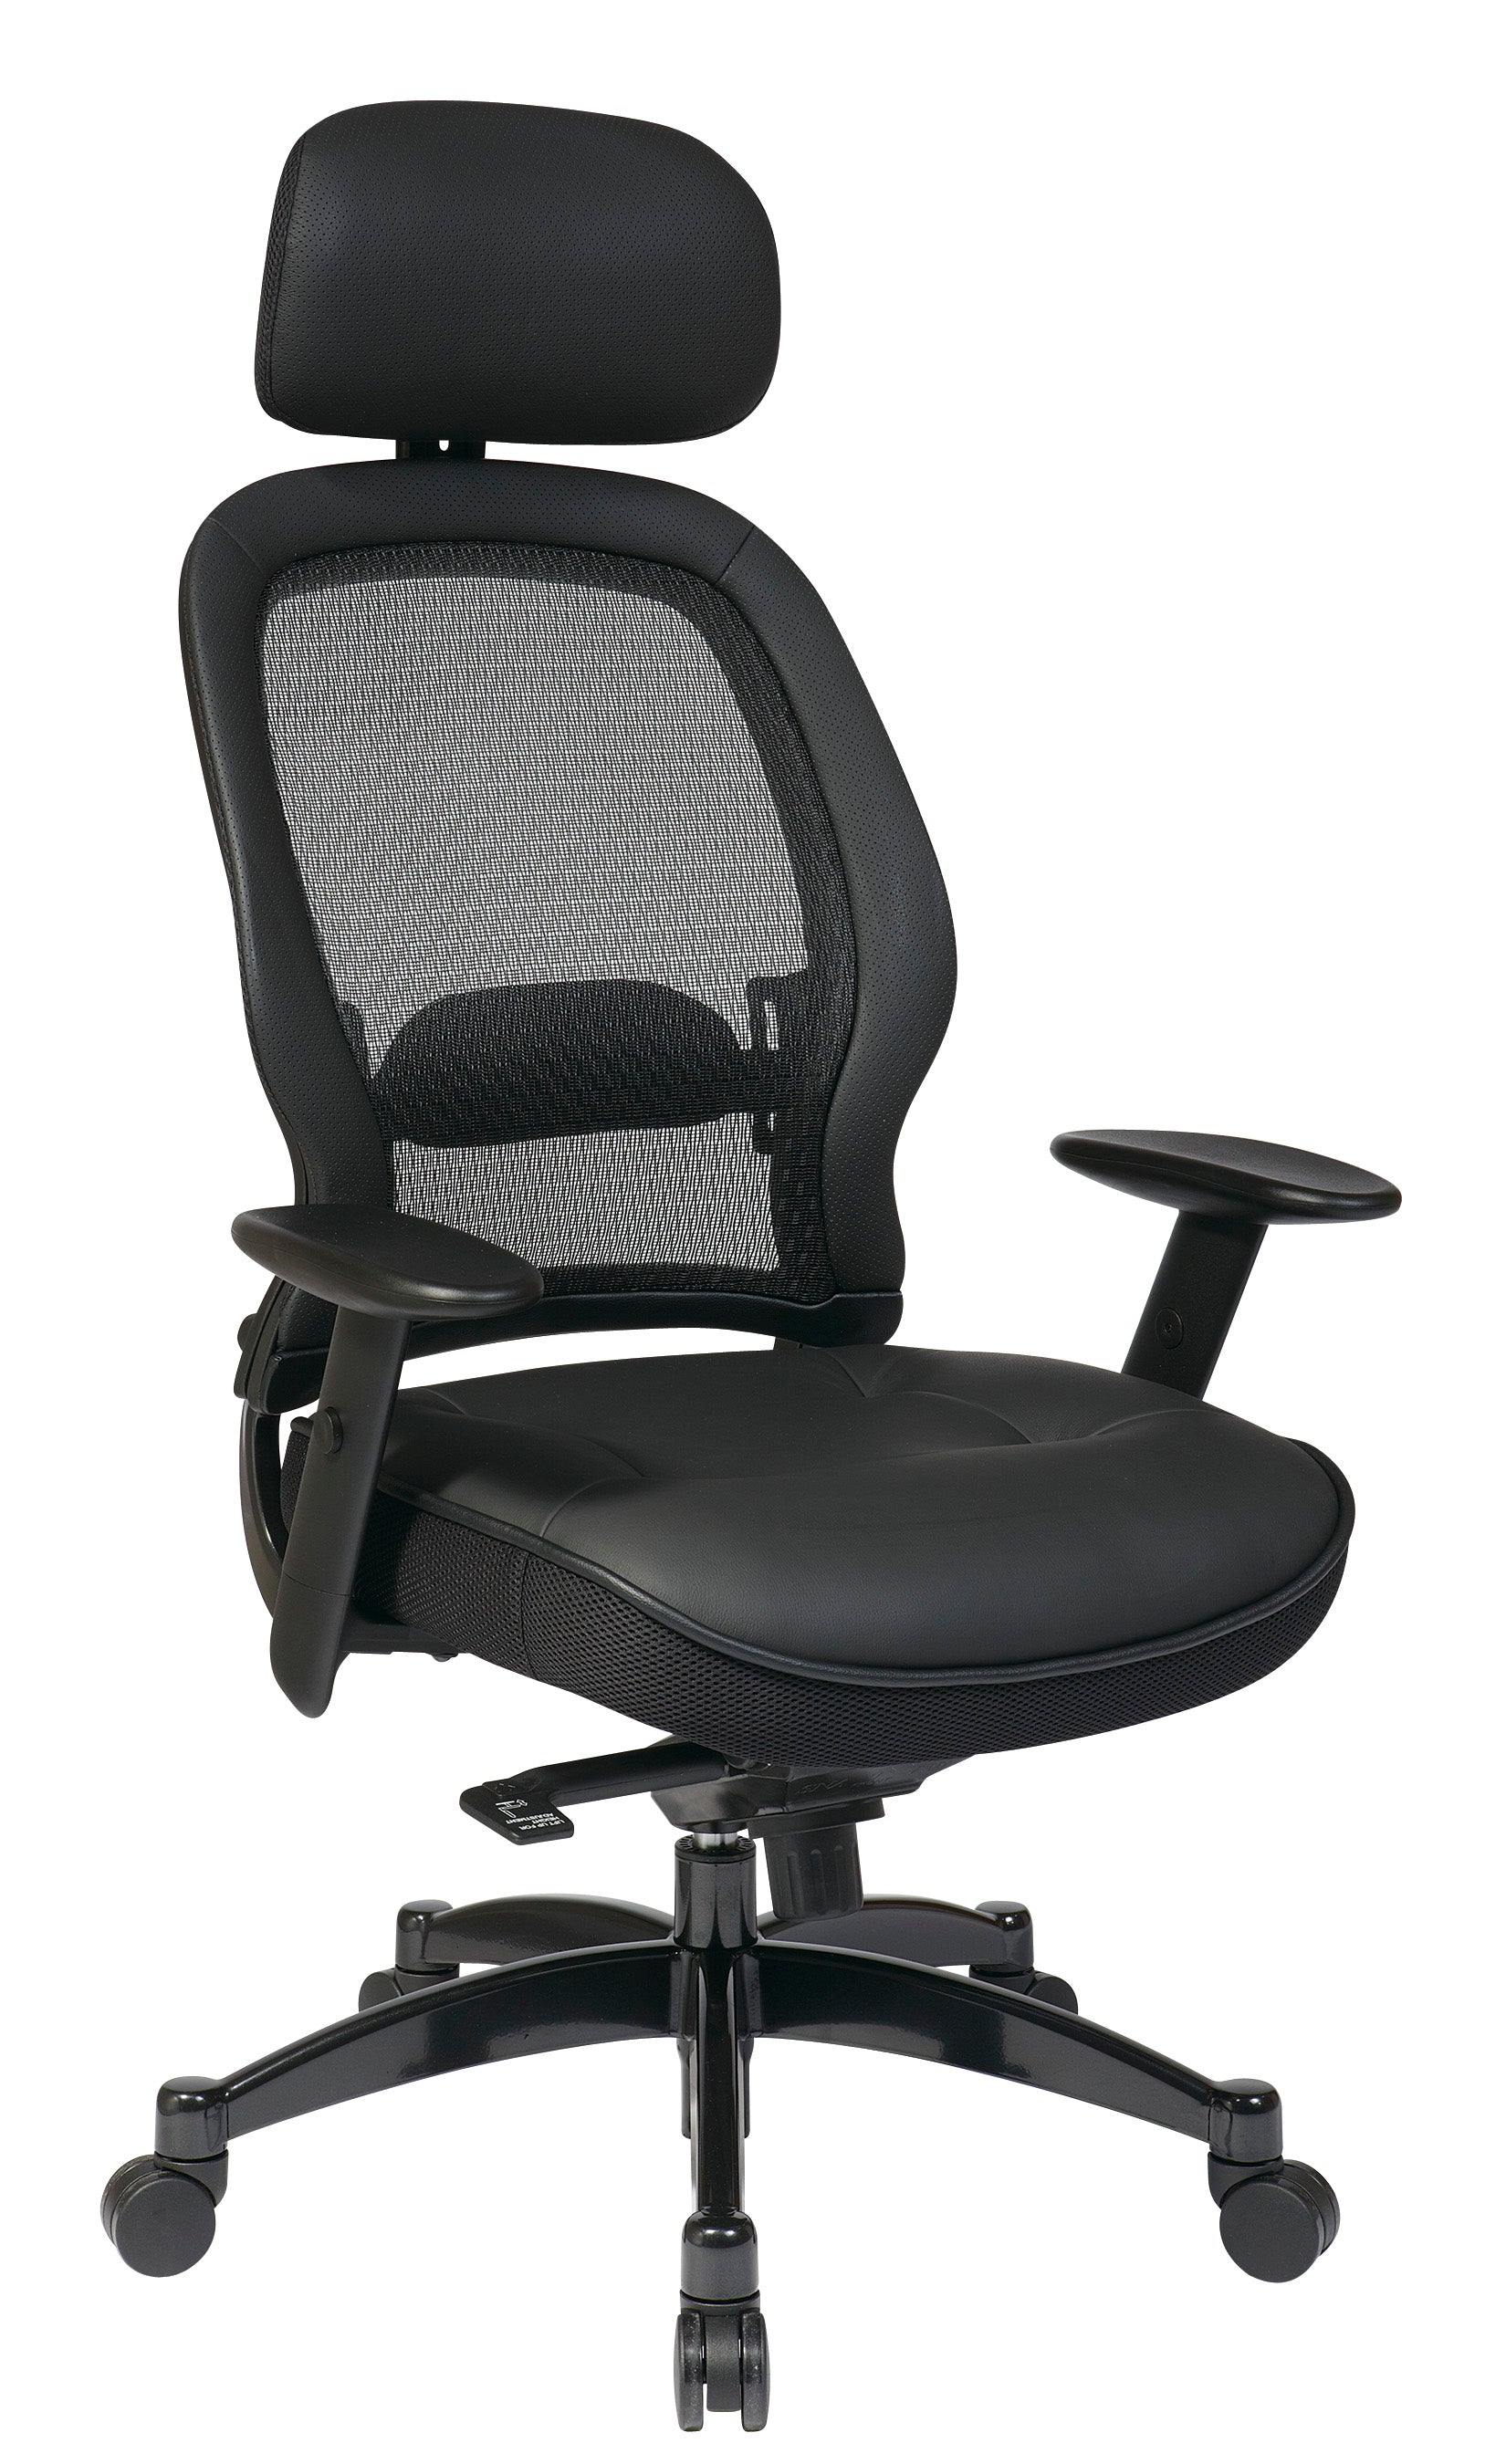 Professional Black Breathable Mesh Back Chair